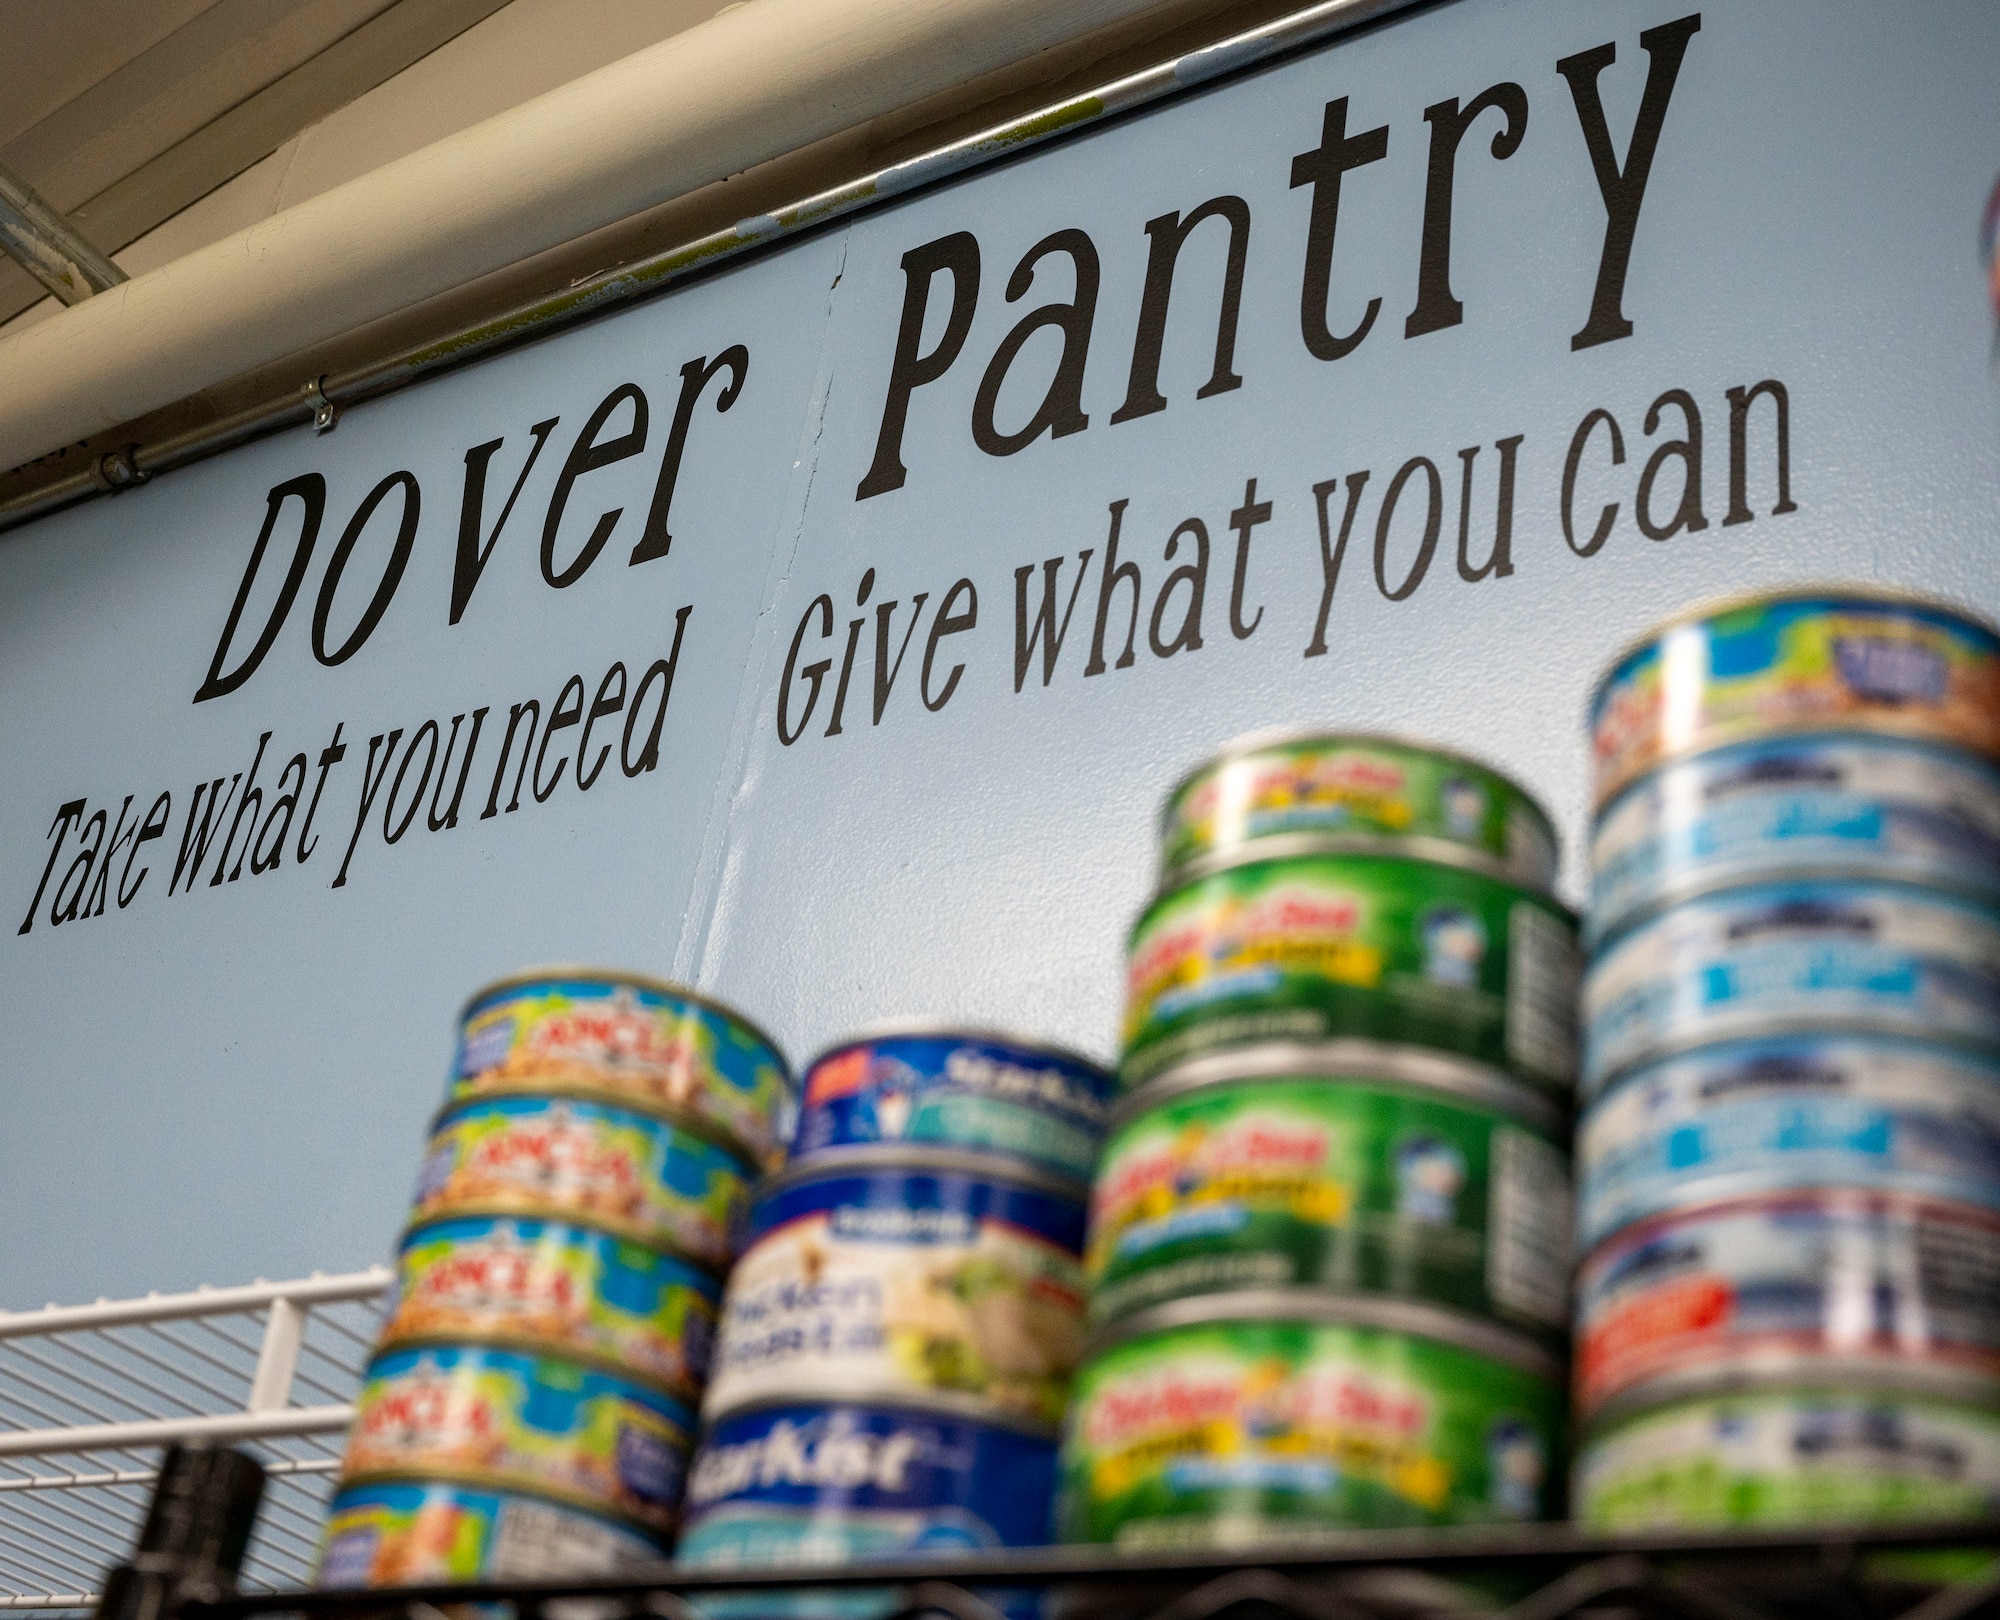 Created by key spouses, Lynne Otis and Jessica Hammer, the Dover Food Pantry encourages Airmen to “take what they need” and “give what they can” at Dover Air Force Base, Delaware, Jan. 20, 2021. Located in the Airman’s Attic, the food pantry was created by Otis and Hammer in an effort to alleviate financial burdens Airmen and their families may face during the COVID-19 pandemic. (U.S. Air Force photo by Airman 1st Class Cydney Lee)